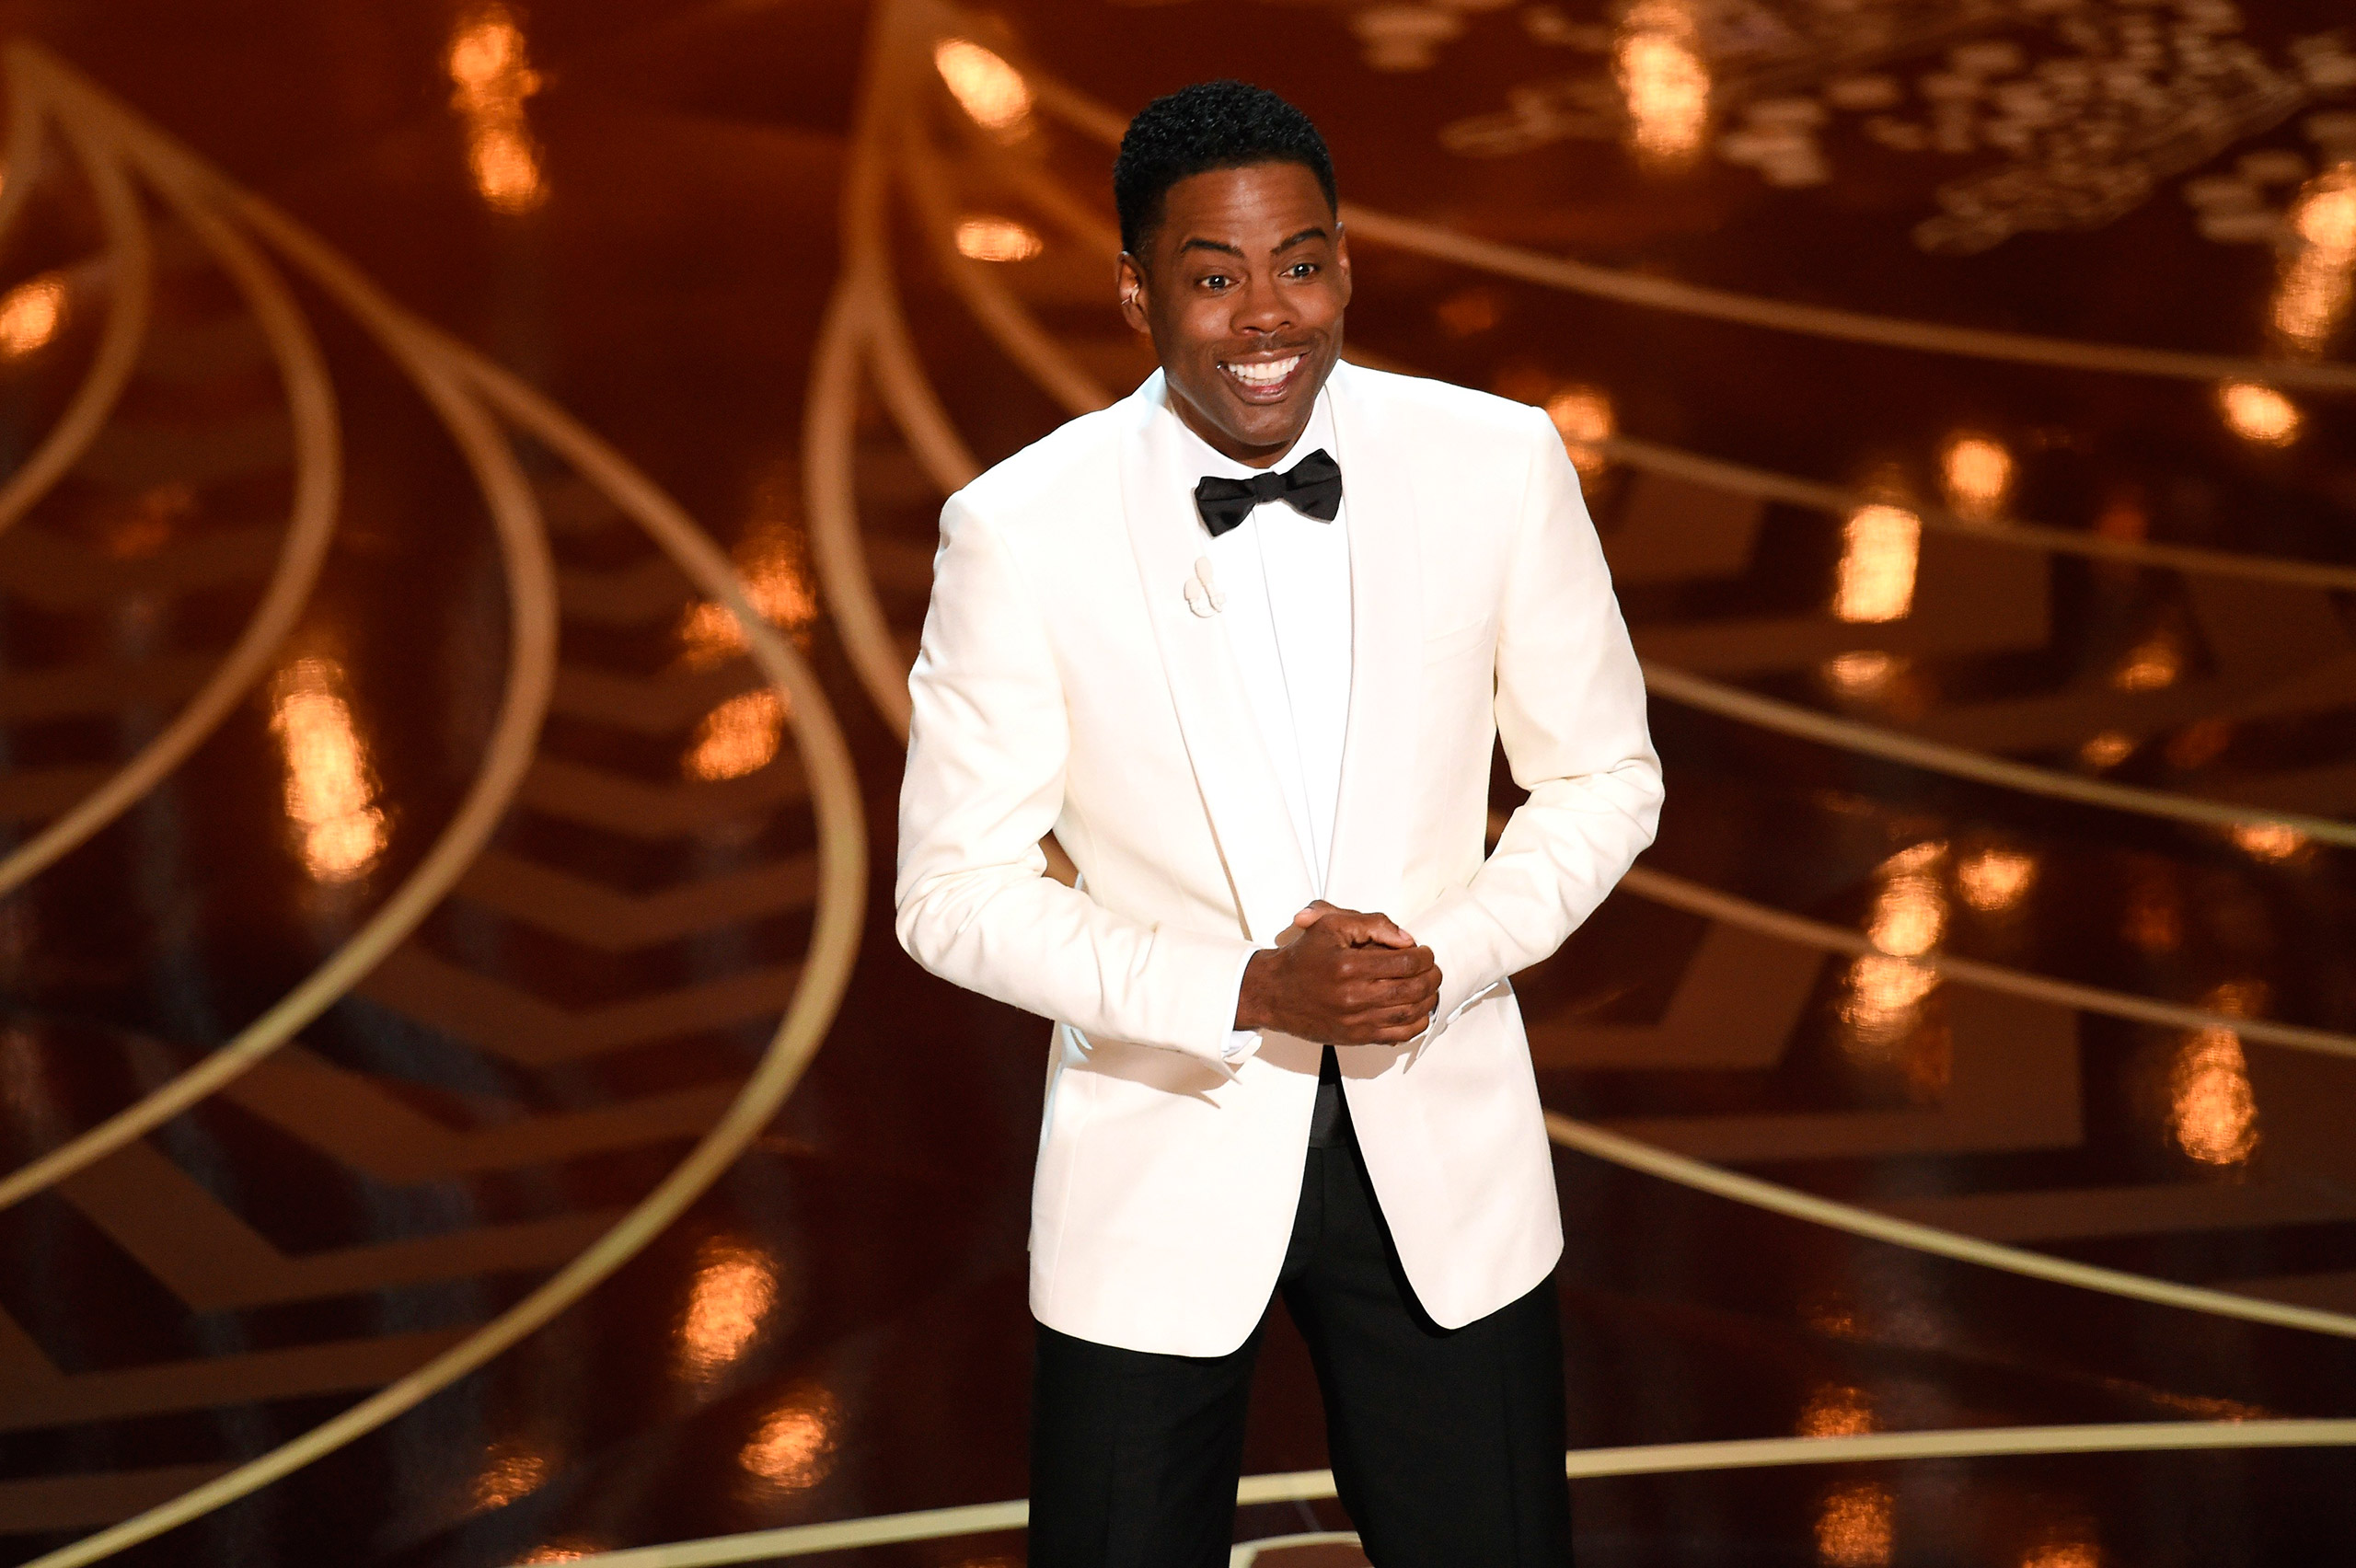 Chris Rock speaks onstage during the 88th Annual Academy Awards at the Dolby Theatre in Hollywood, Calif, Feb. 28, 2016. Kevin Winter—Getty Images (Kevin Winter—Getty Images)